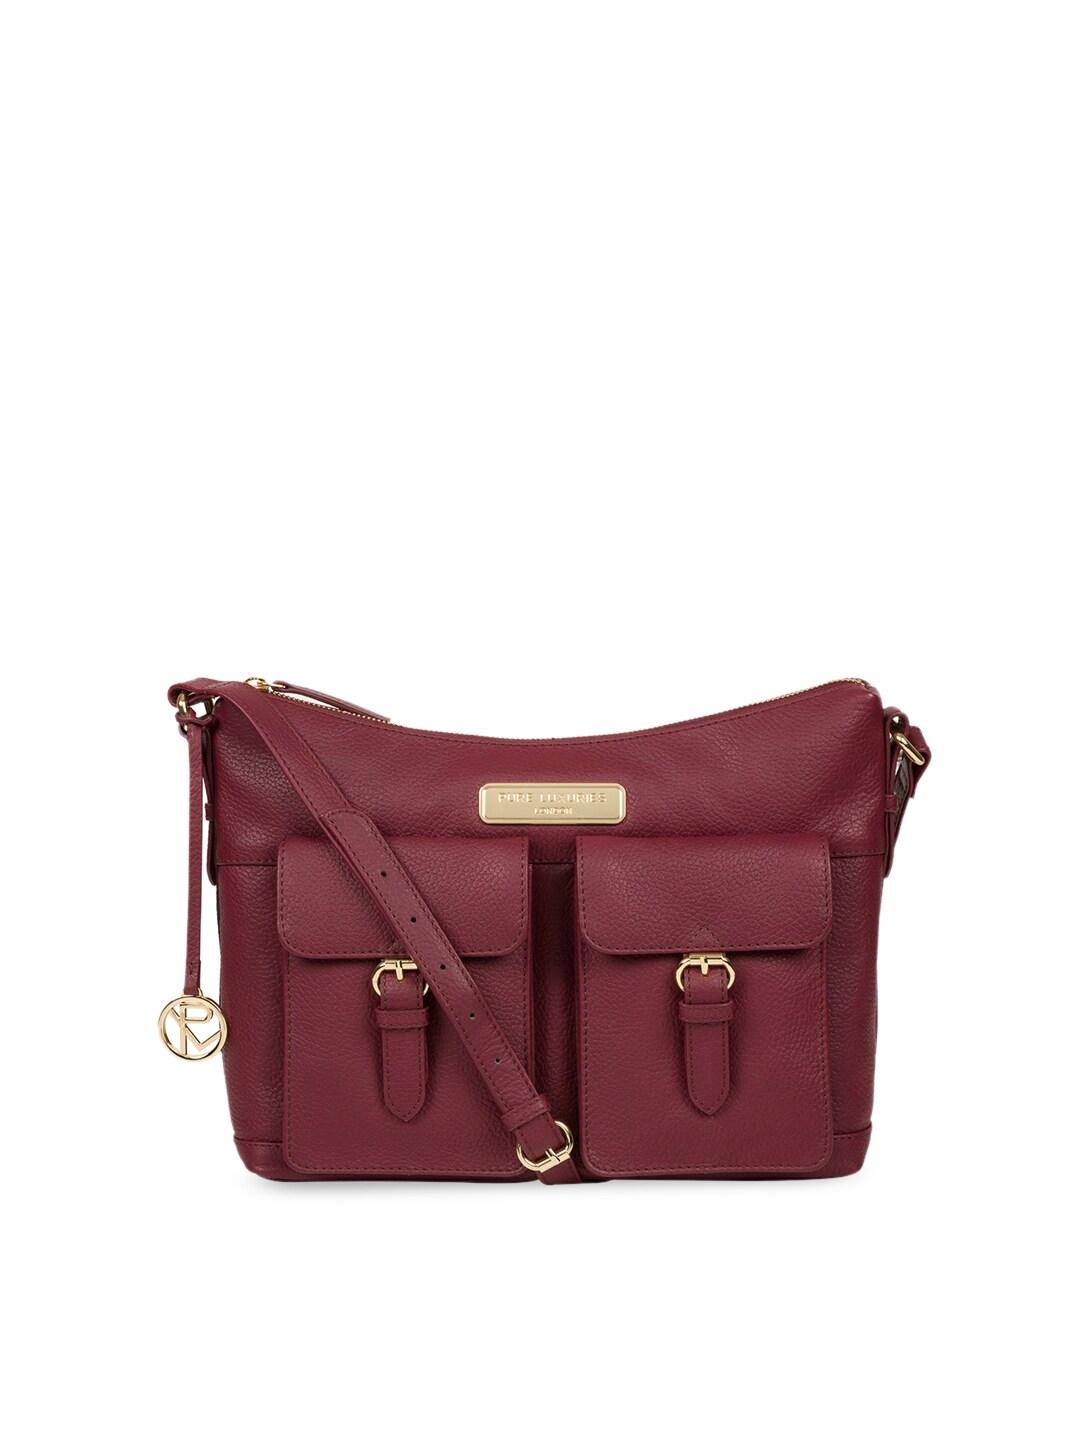 PURE LUXURIES LONDON Women Maroon Solid Genuine Leather Jenna Tote Bag